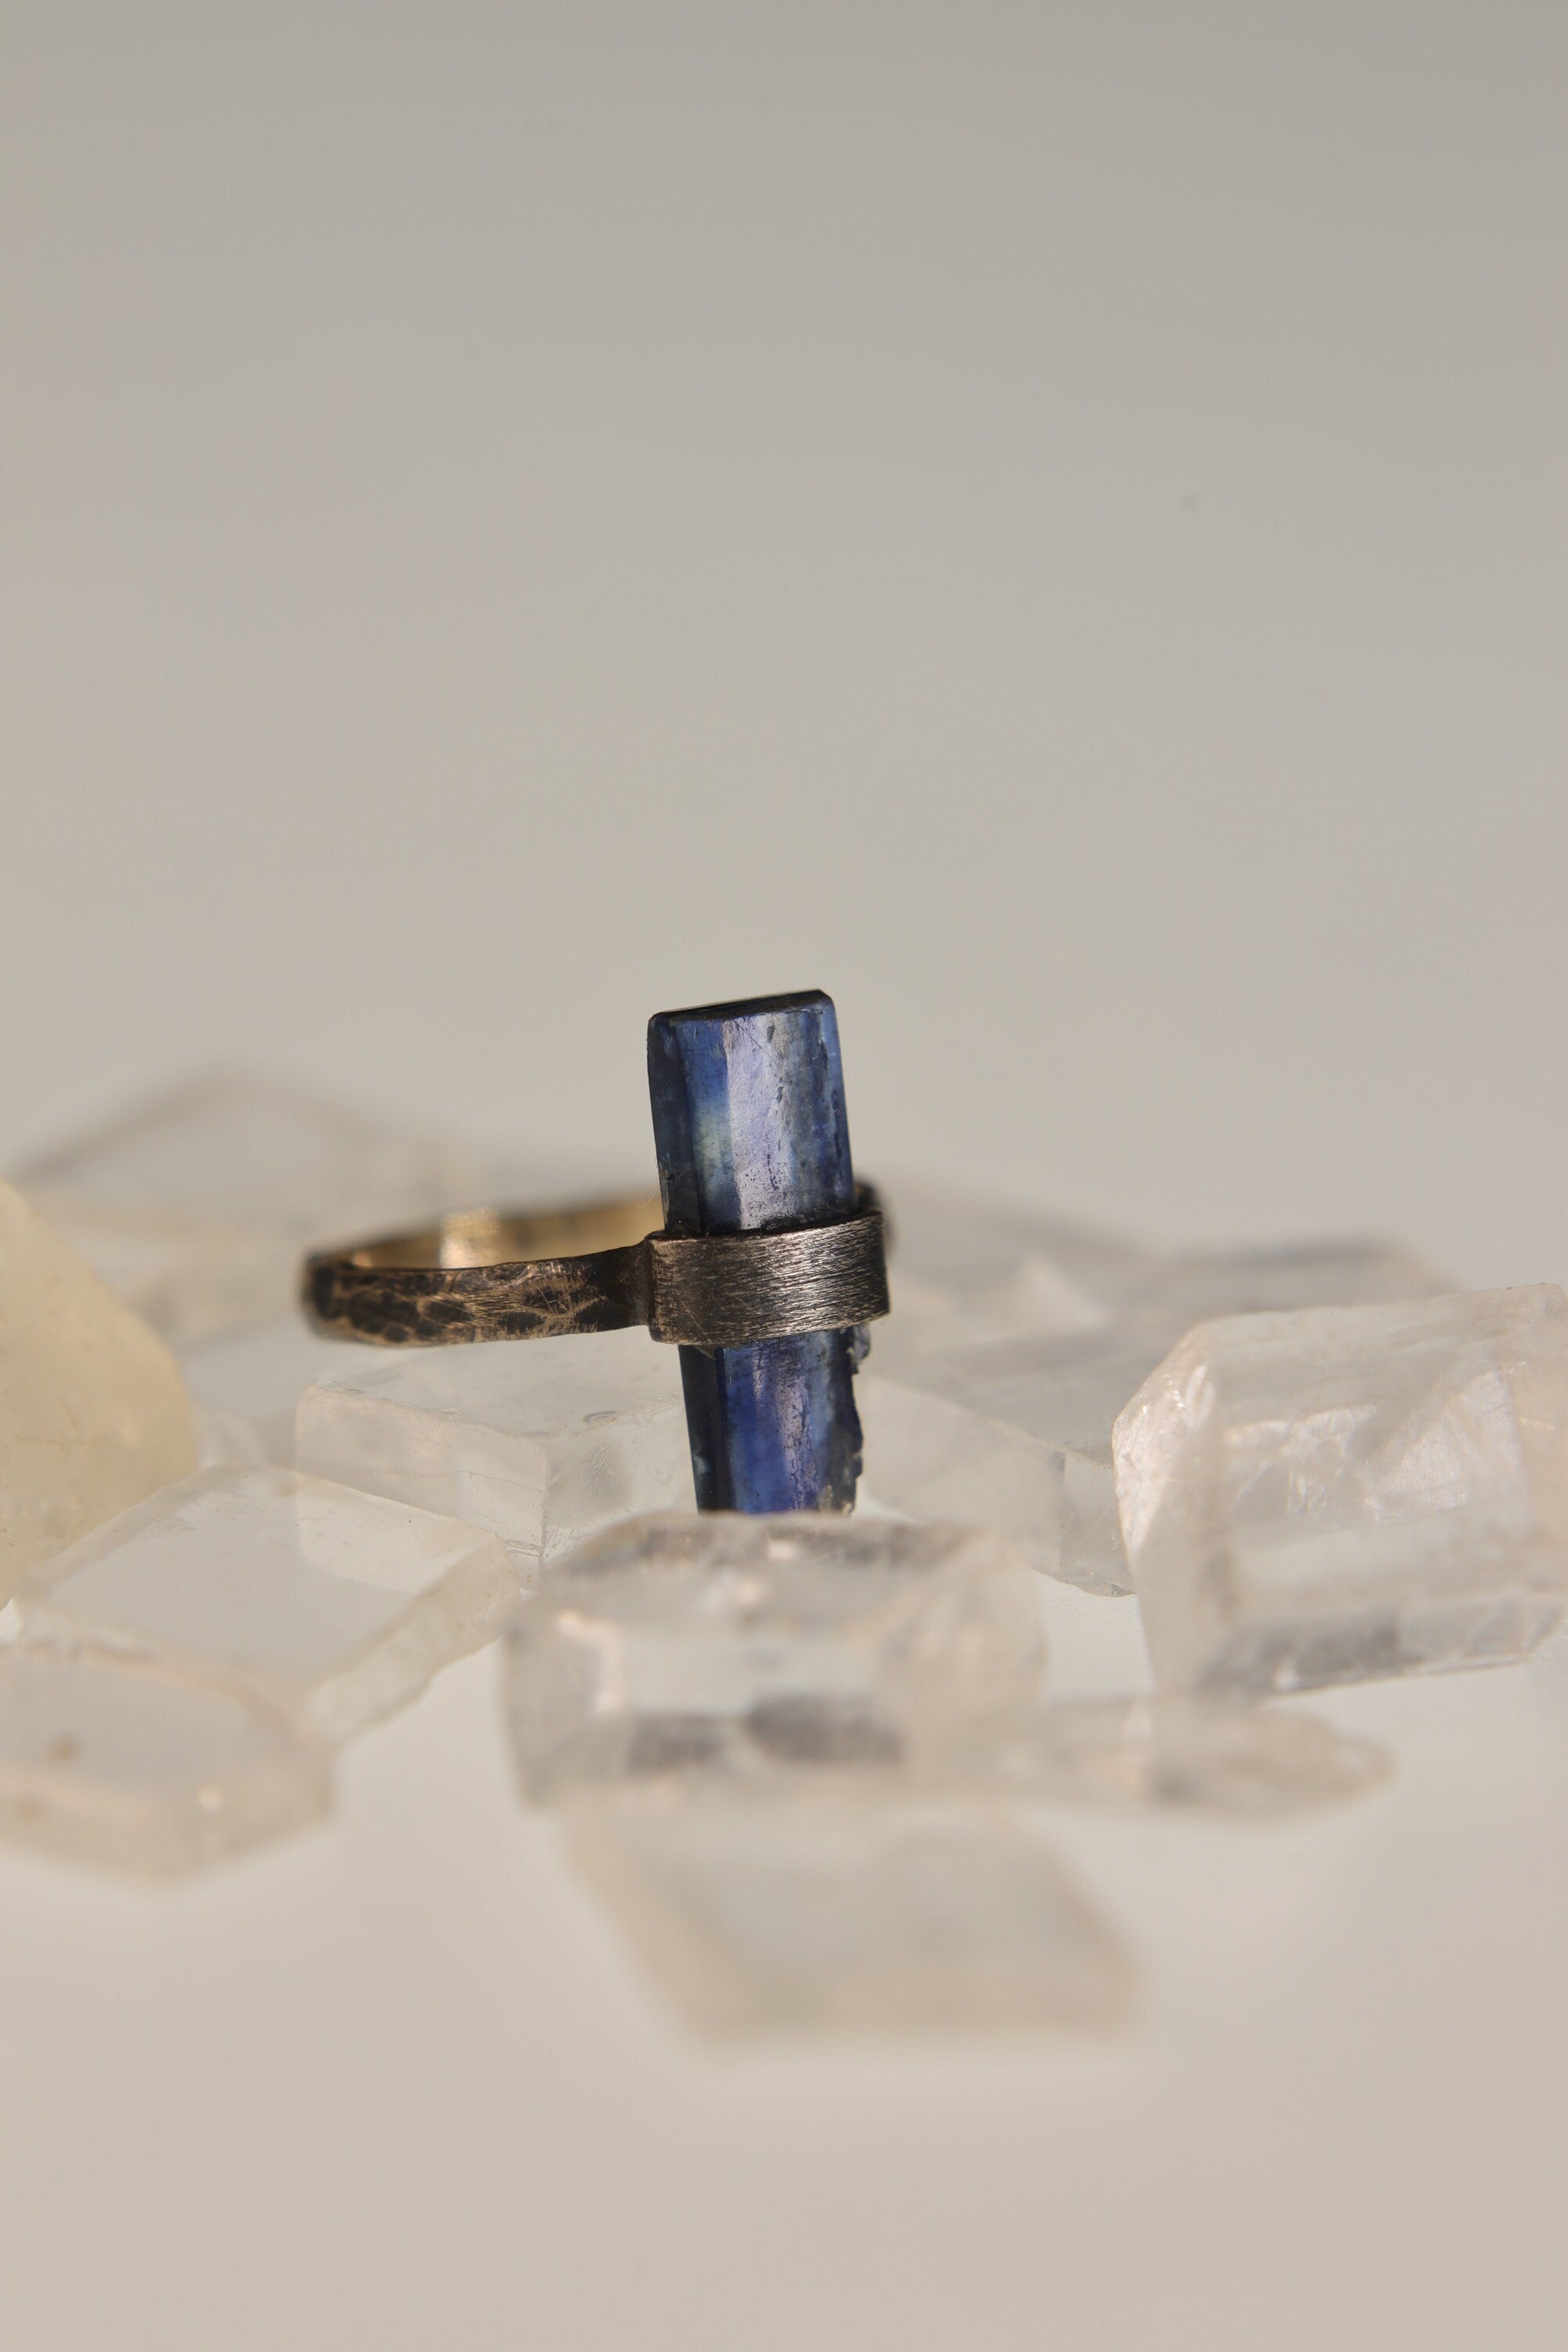 Australis Serenity: Textured & Oxidised Sterling Silver Ring with Raw Natural Australian Ice Kyanite - Size 5 US